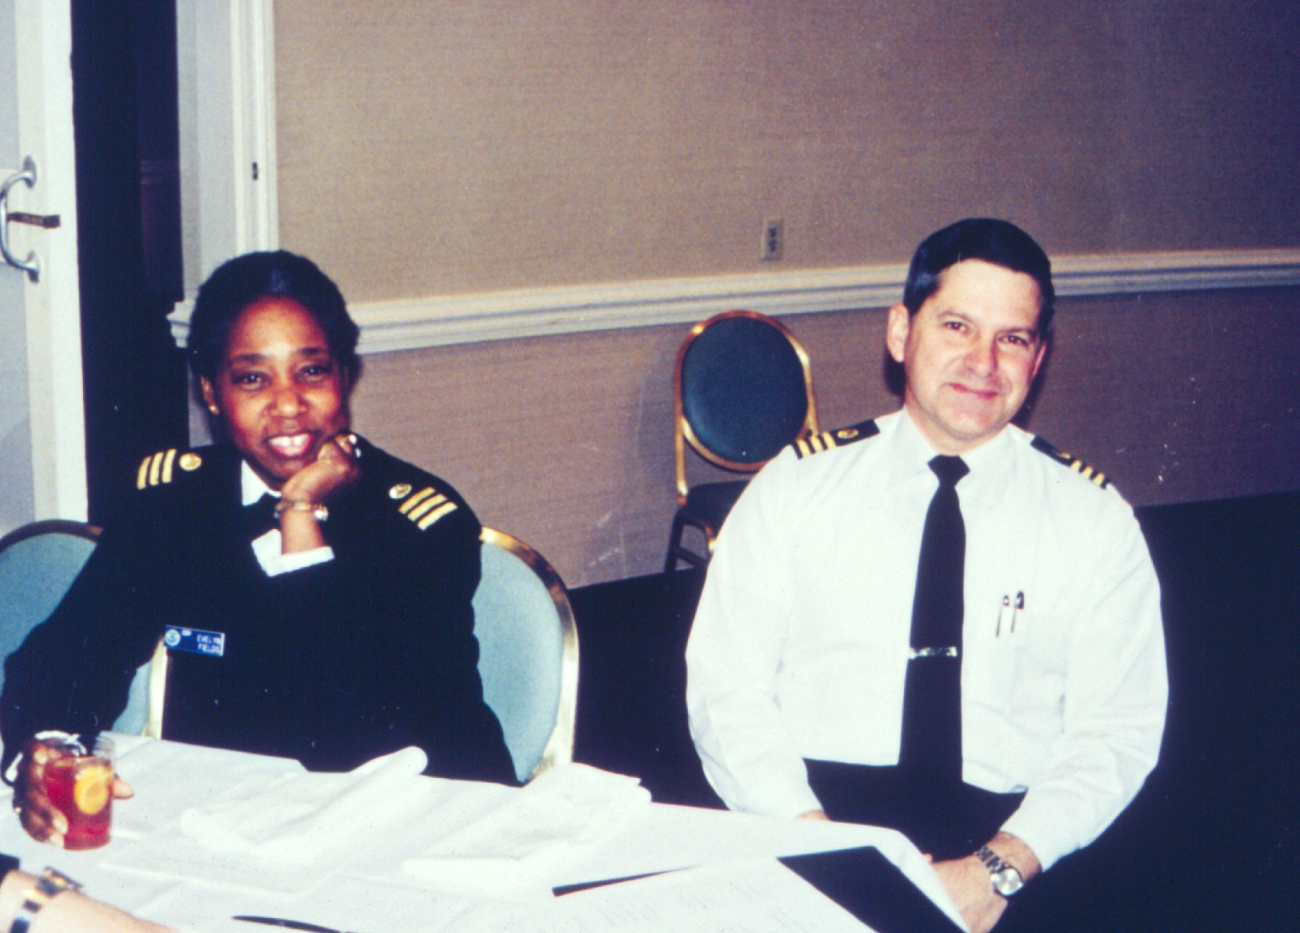 Commanders Evelyn Fields and Larry Simoneaux at a NOAA Corpsgathering